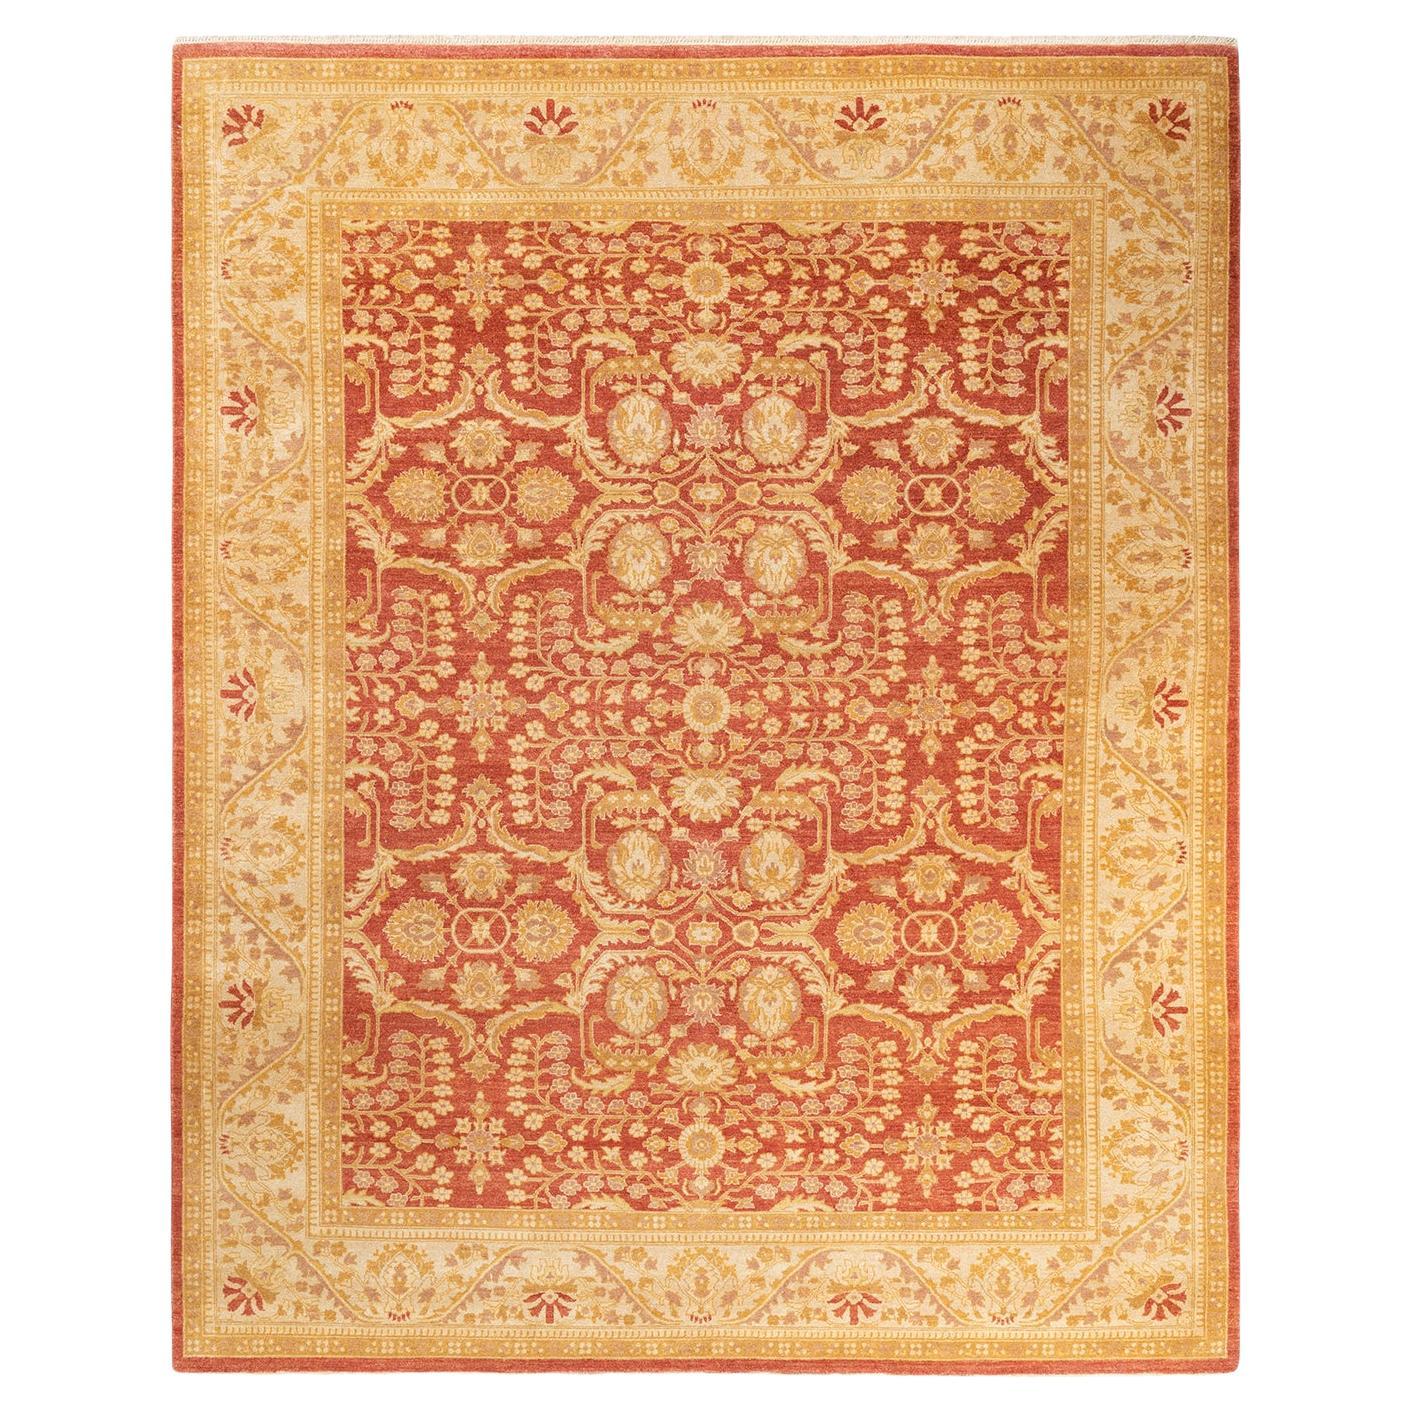 One-of-a-kind Hand Made Contemporary Eclectic Orange Area Rug